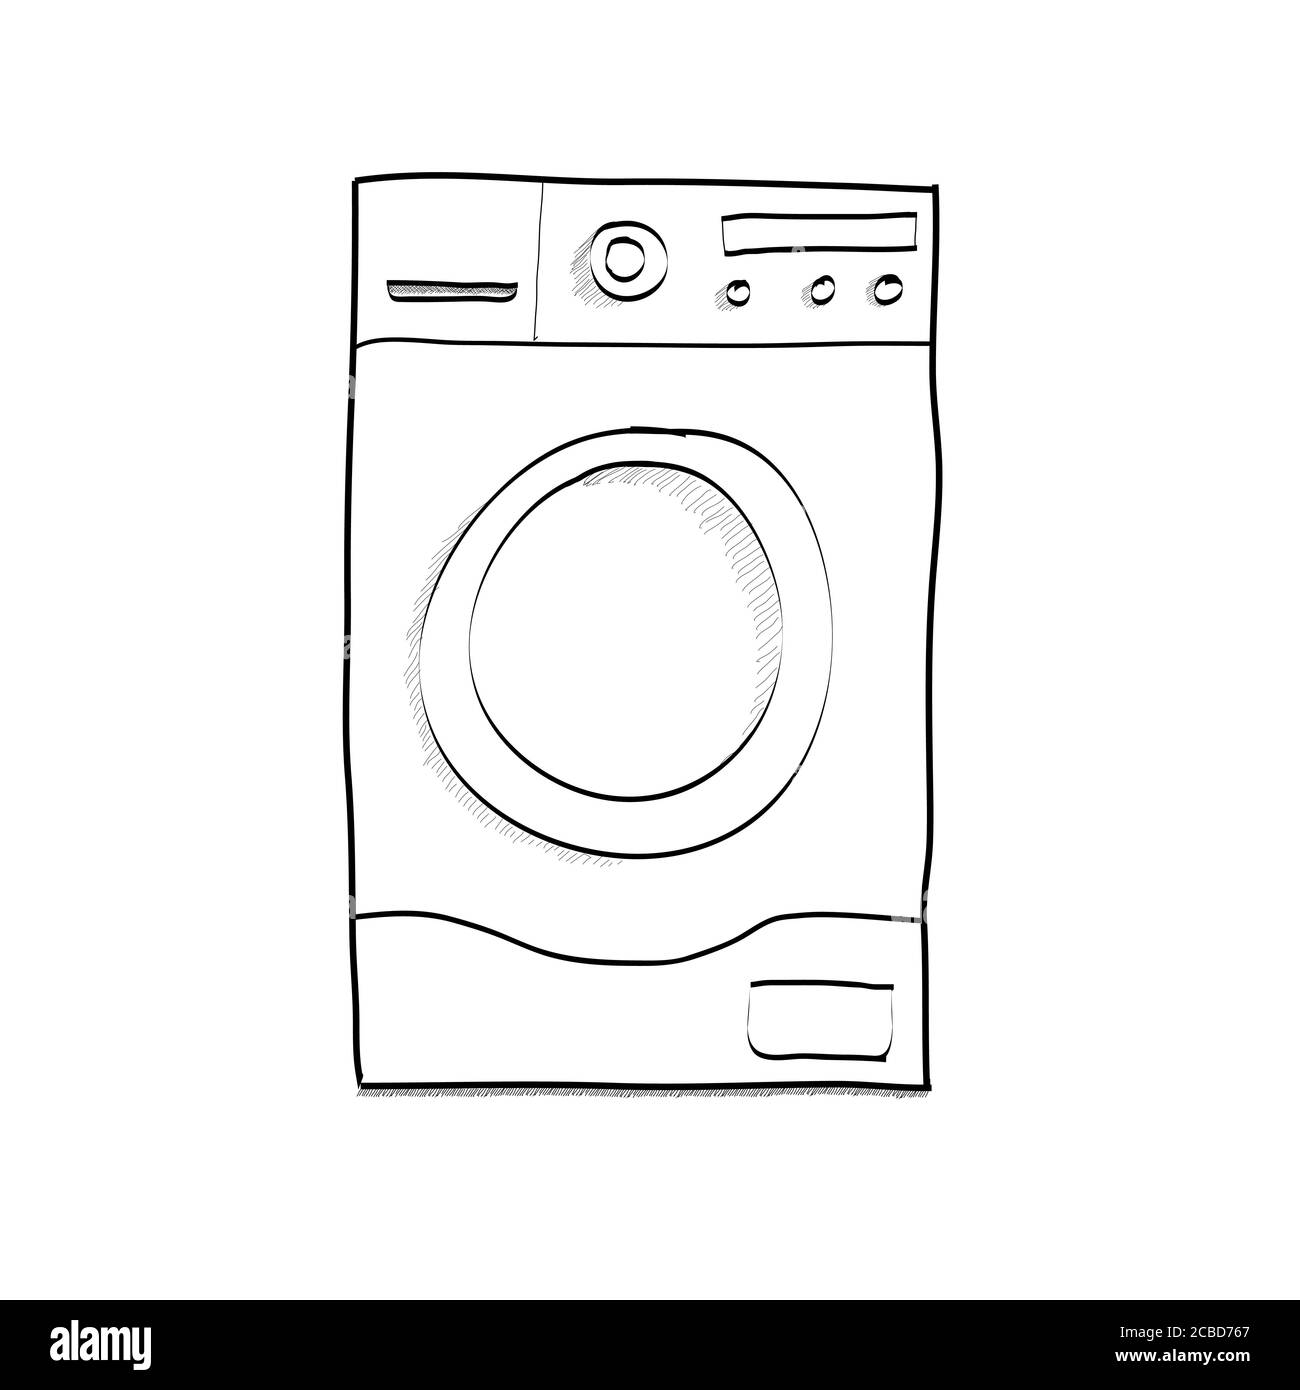 Top Loader Small Washing Machine Illustration Drawing Engraving Ink  Line Art Vector Stock Vector  Illustration of container etching  184472463